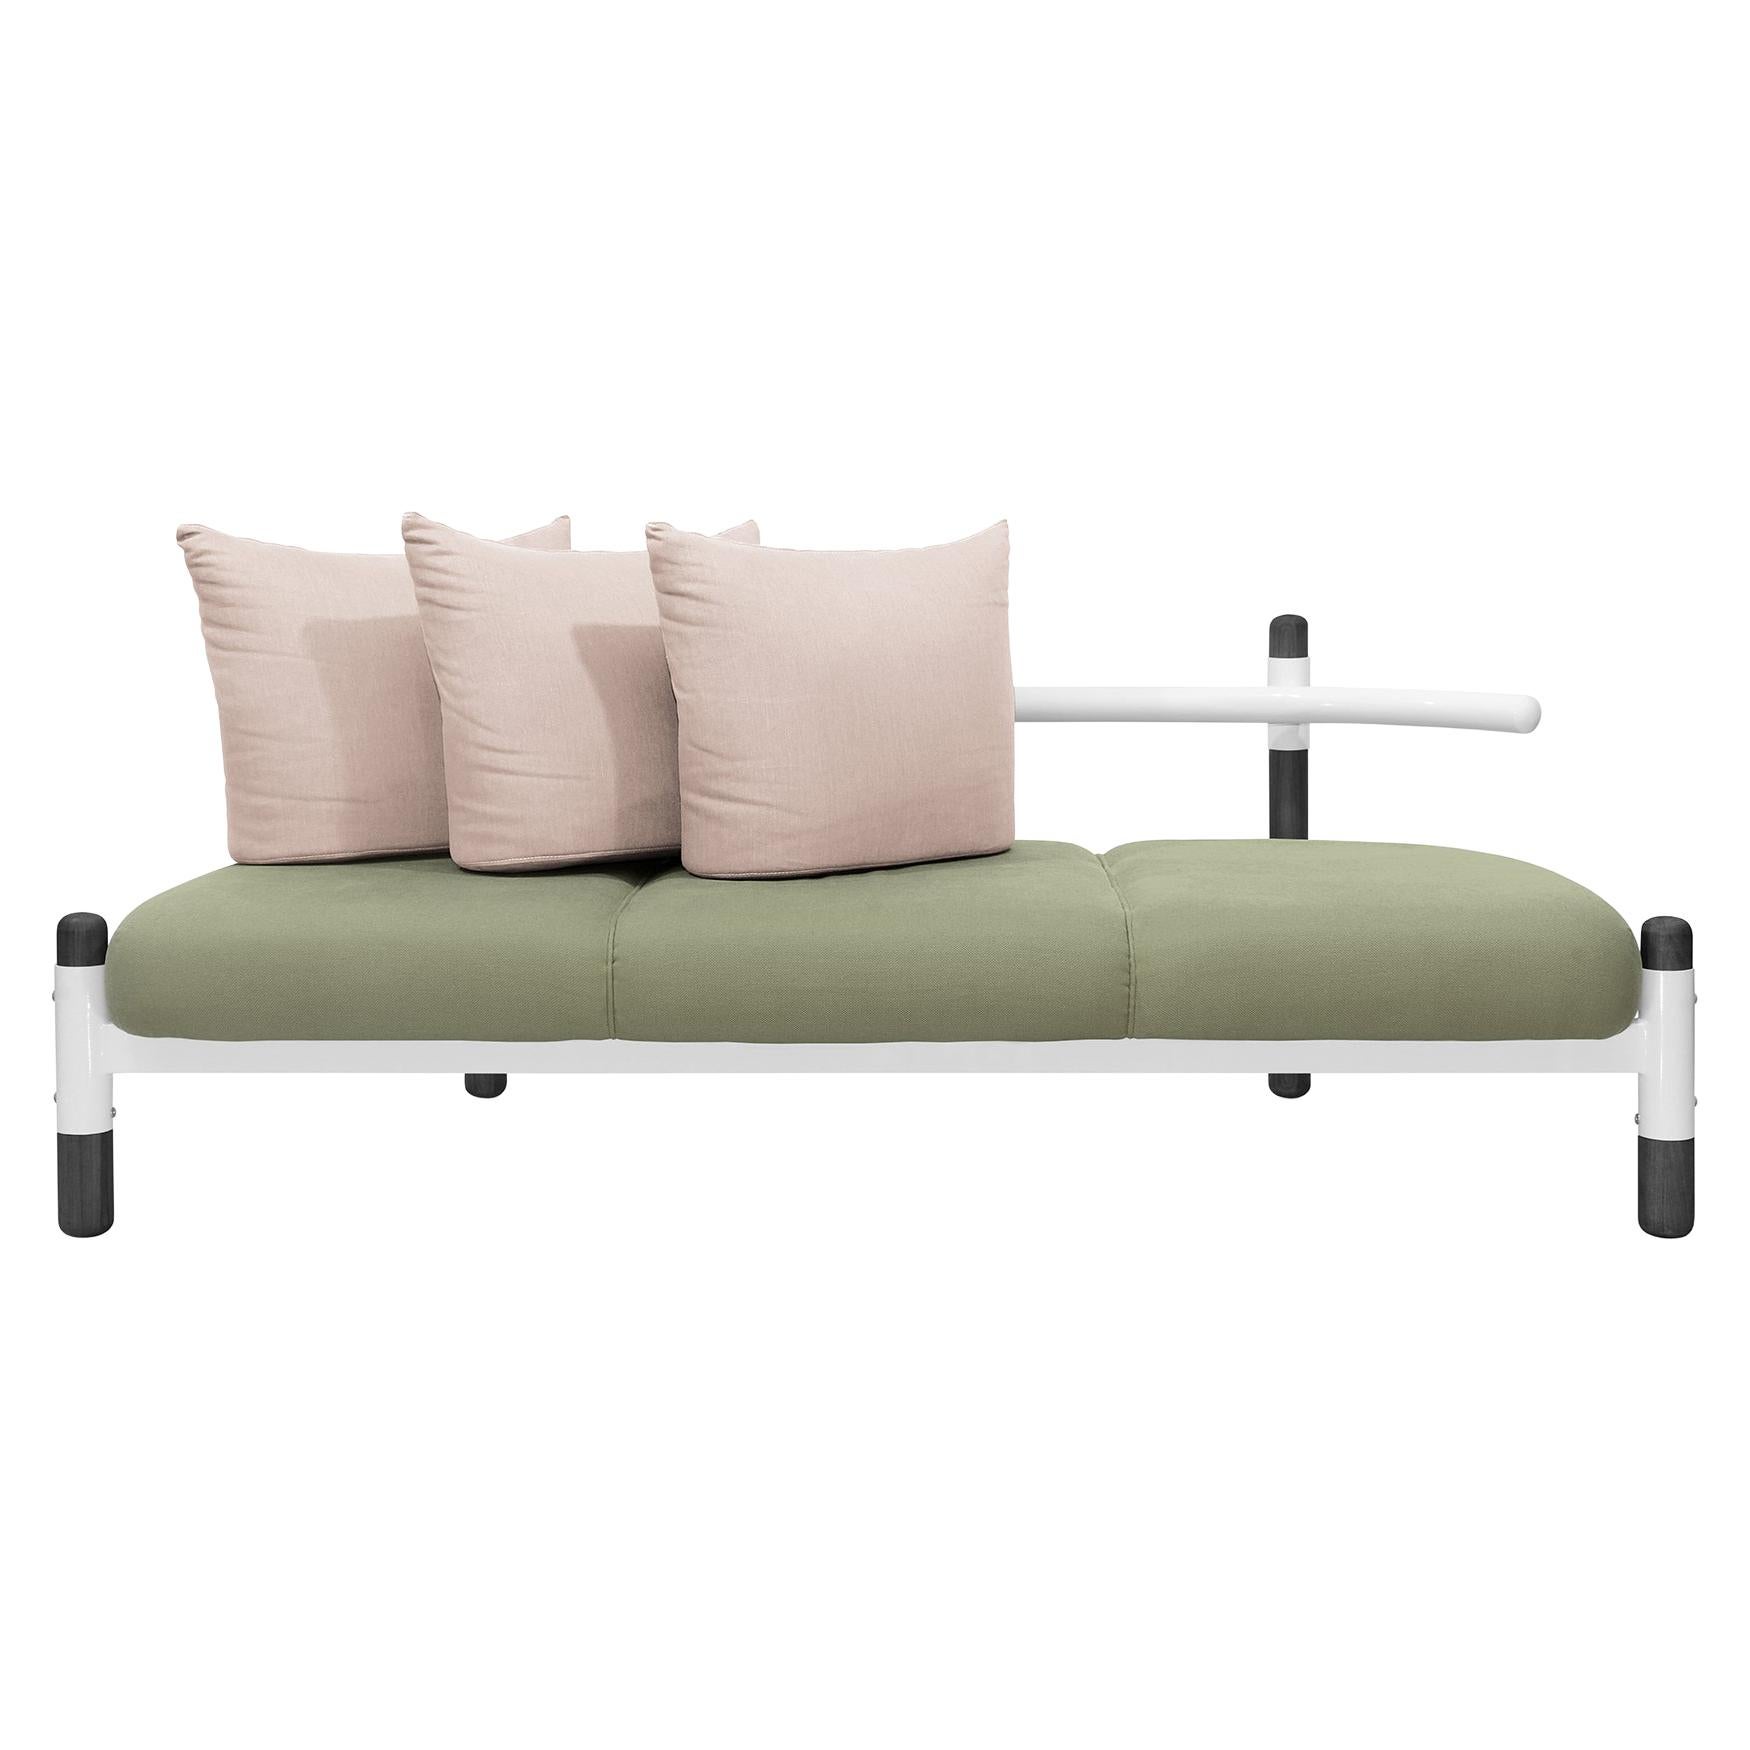 Green PK15 Three-Seat Sofa, Steel Structure and Ebonized Legs by Paulo Kobylka For Sale